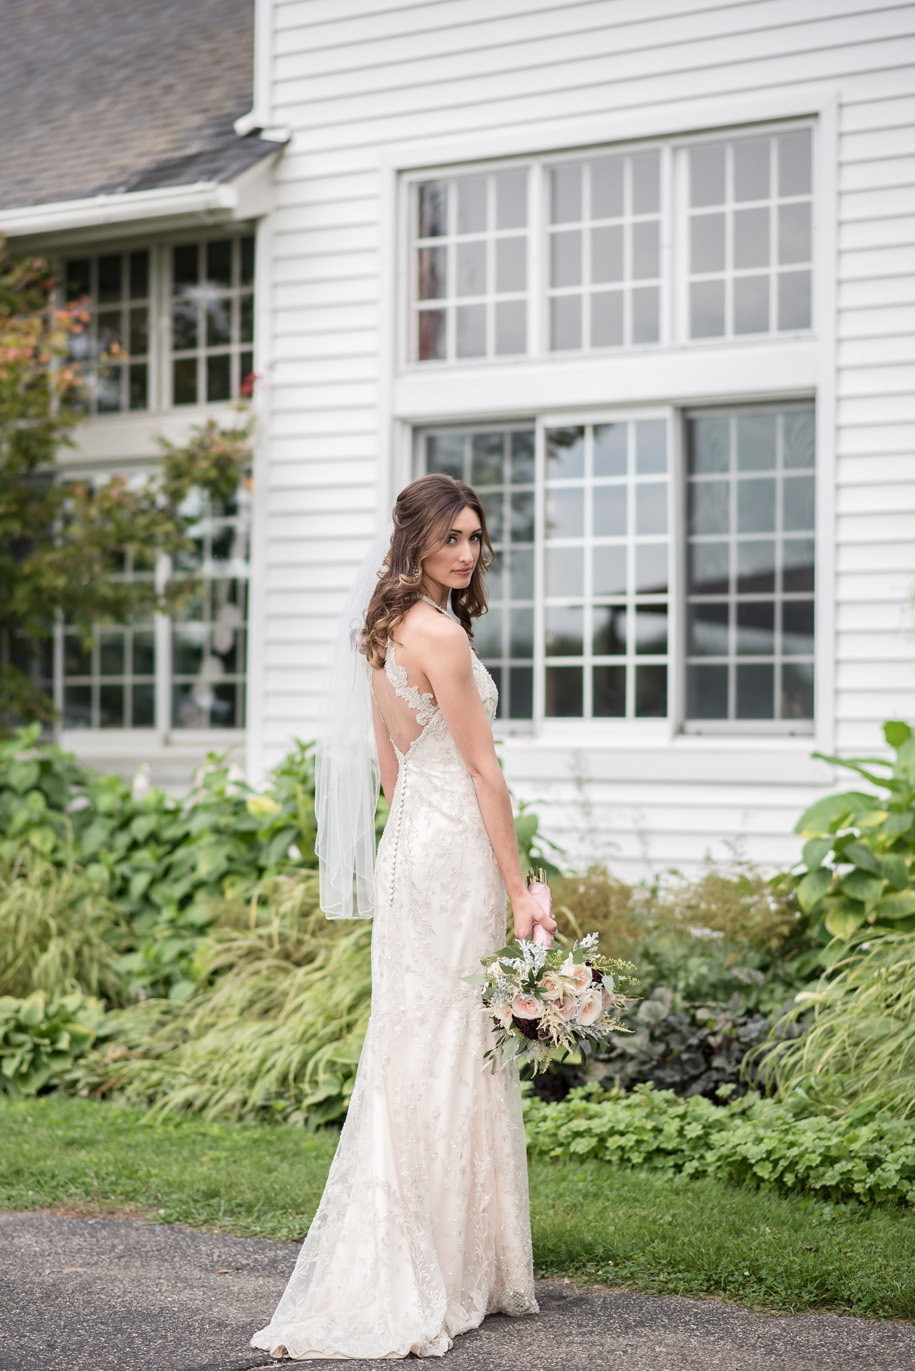 Gorgeous bridal portrait at Waldenwoods Ann Arbor, Michigan with a lace halter wedding dress and rustic bouquet in pinks, greens, and wine